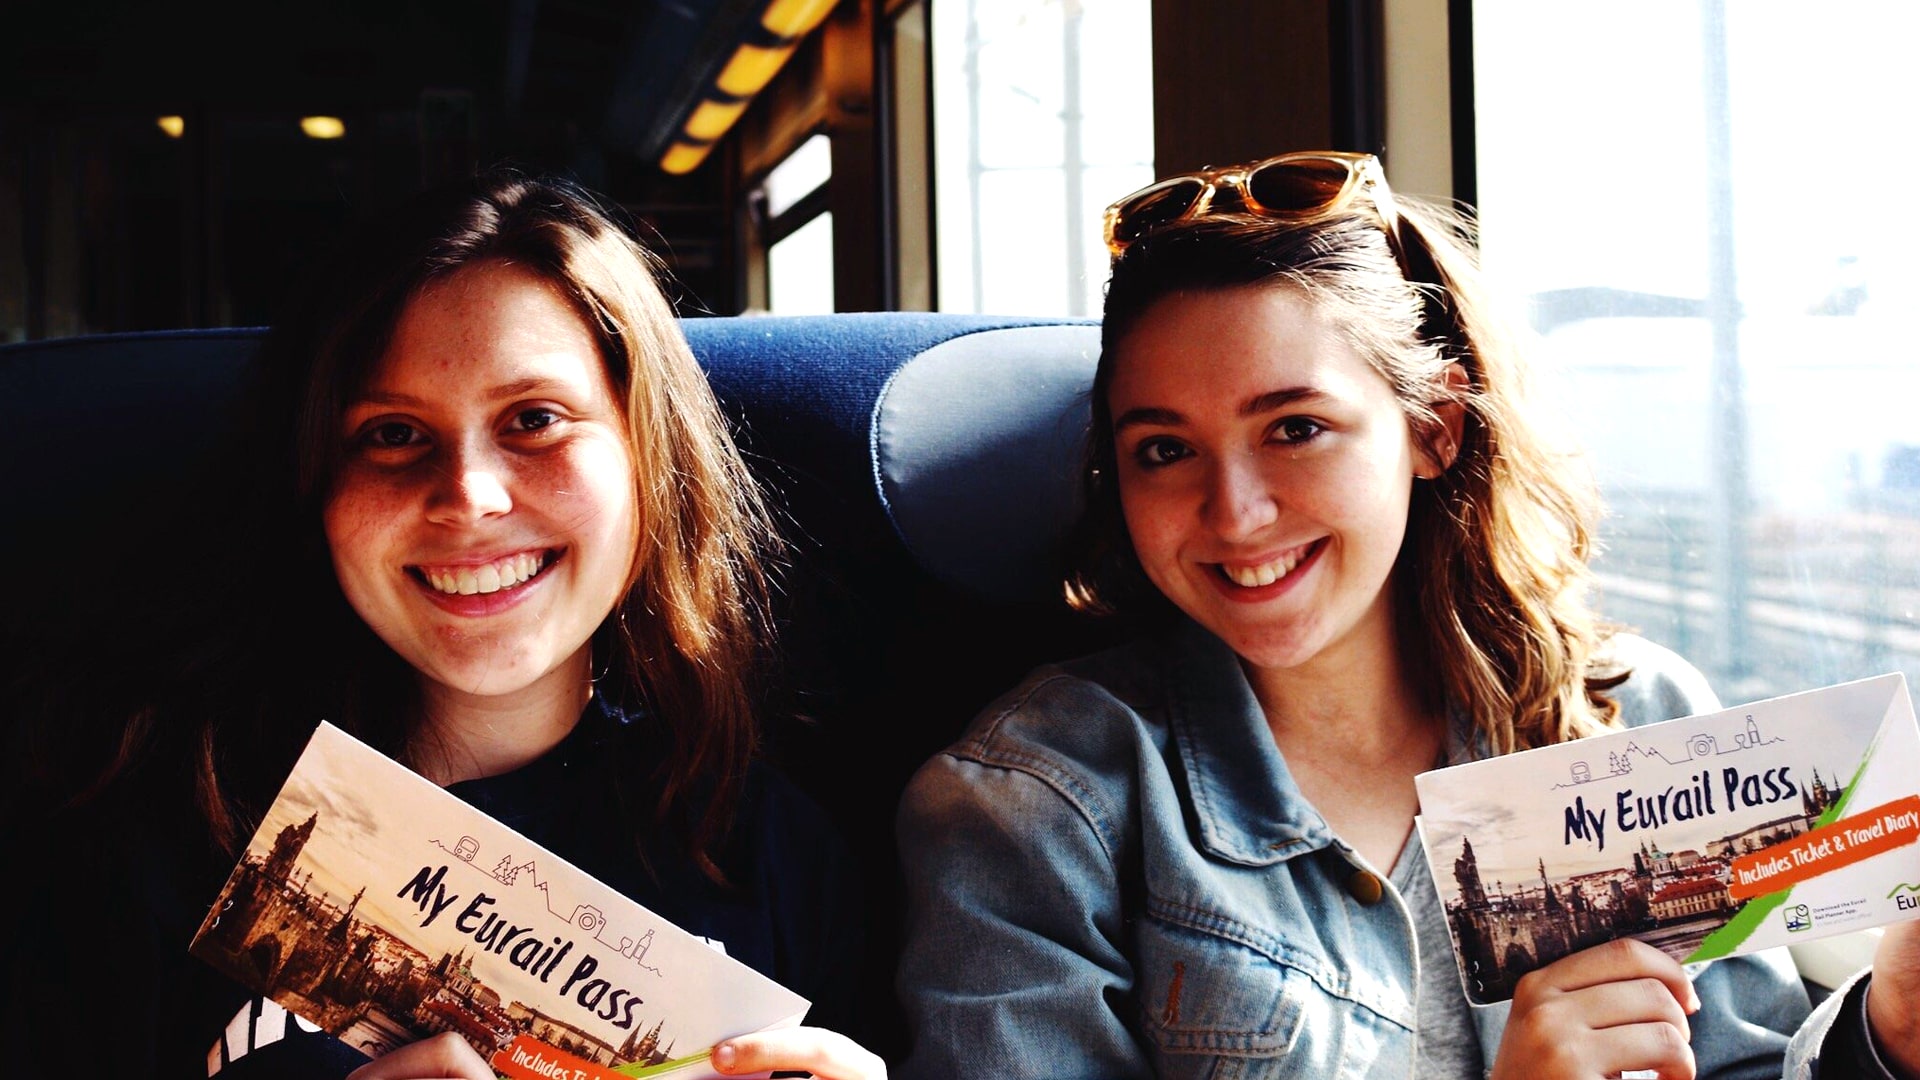 Have Eurail pass, will travel. Katelyn Colantonio and friend on a train.